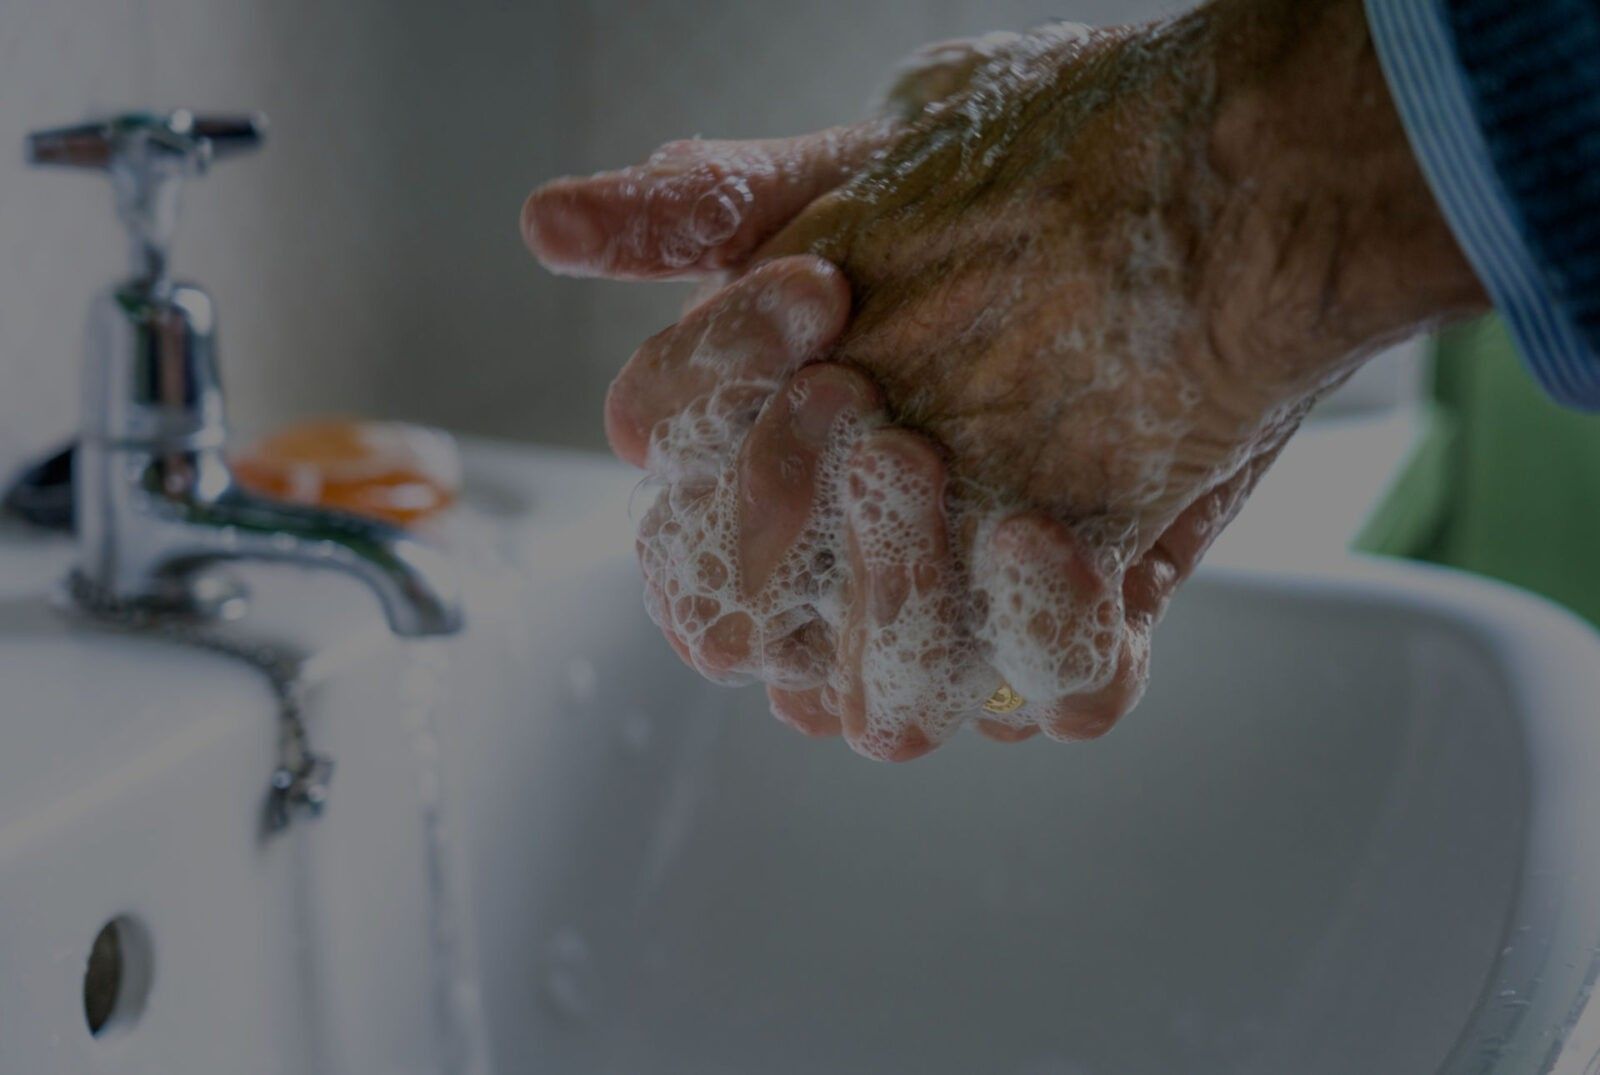 Person washing hands with soap and water at a sink, preventing respiratory infections.